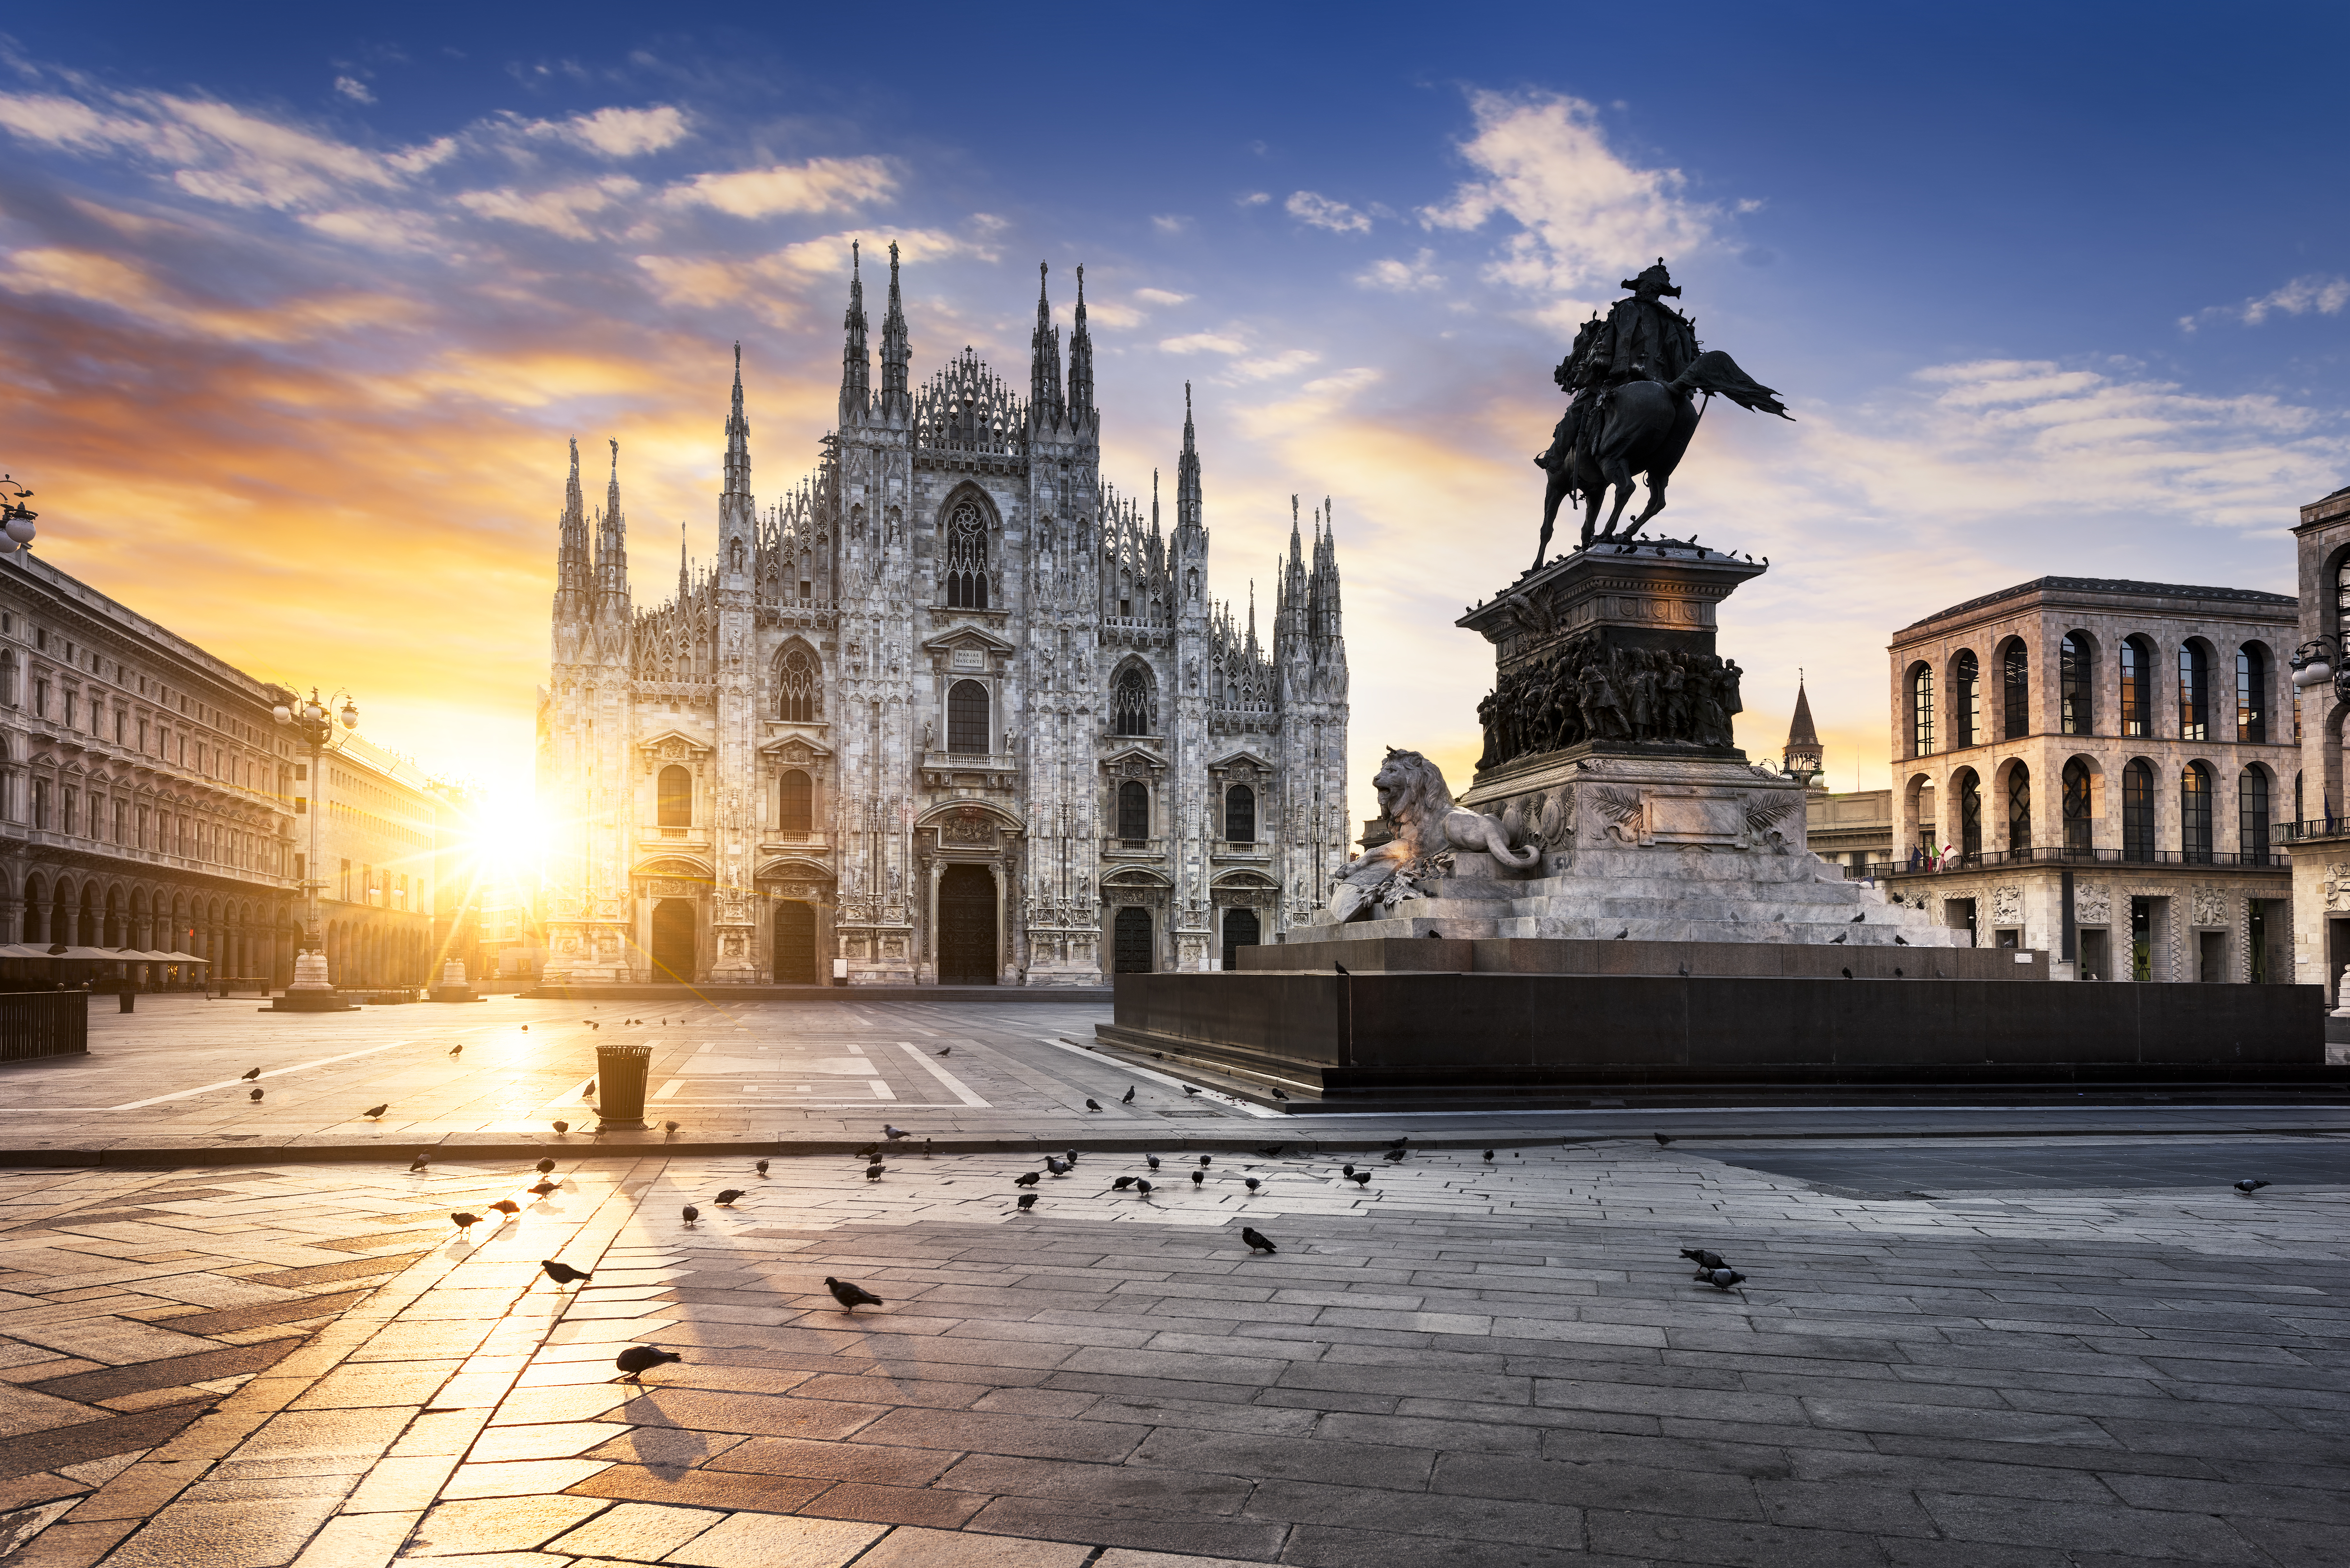 A major tourist destination, Milan is home to an important cultural heritage, including Renaissance palaces, the La Scala opera house and numerous museums. However, to run in Milan is also to run in the industrial, financial and commercial heart of Italy.